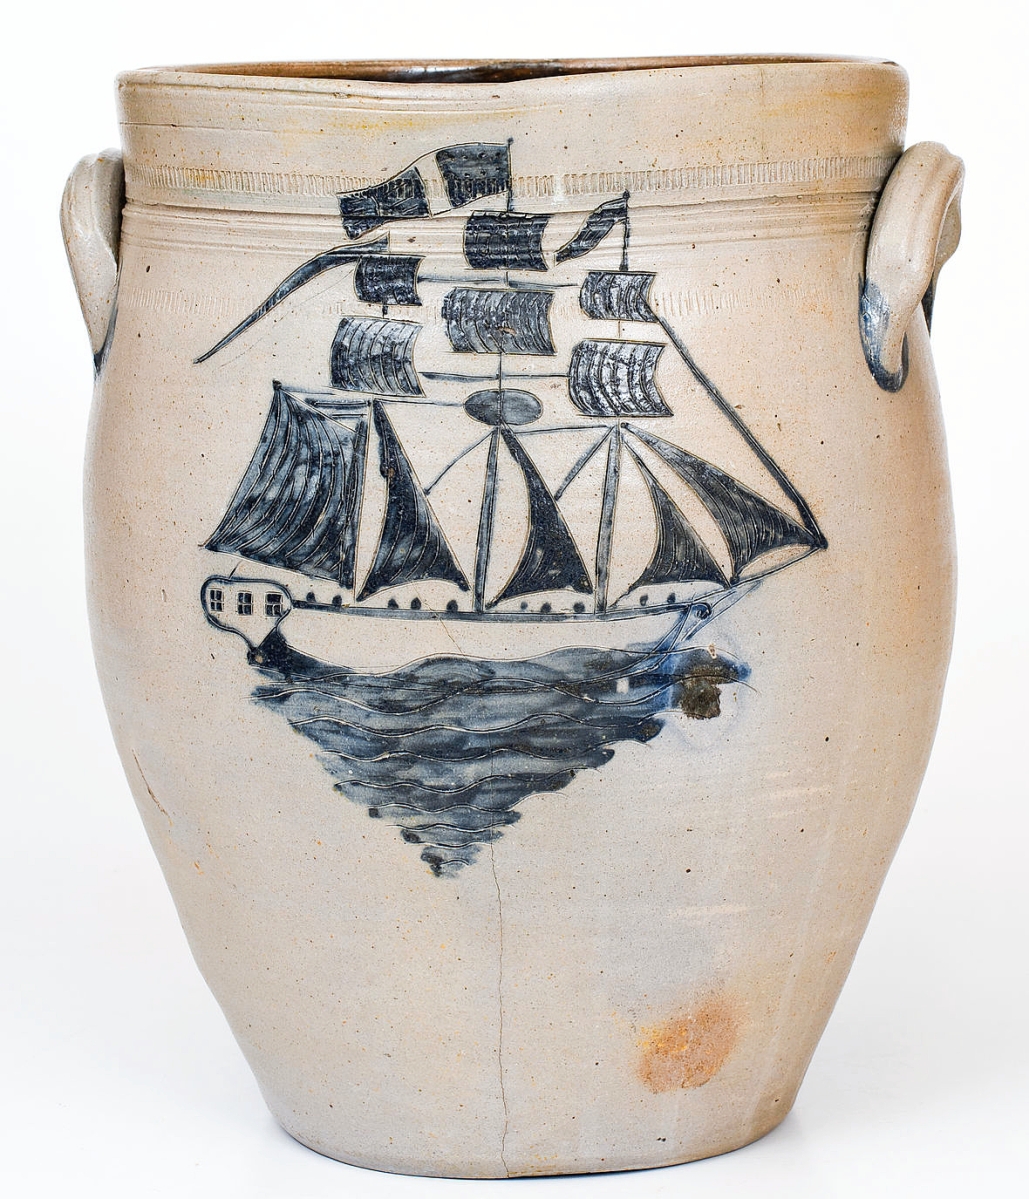 In the firm’s December sale, Crocker Farm got a six-figure result for a stoneware cooler with incised ship. The market offered up another in this 3-gallon jar of New Jersey origin that sold for $21,600. It measured 12¾ inches high.